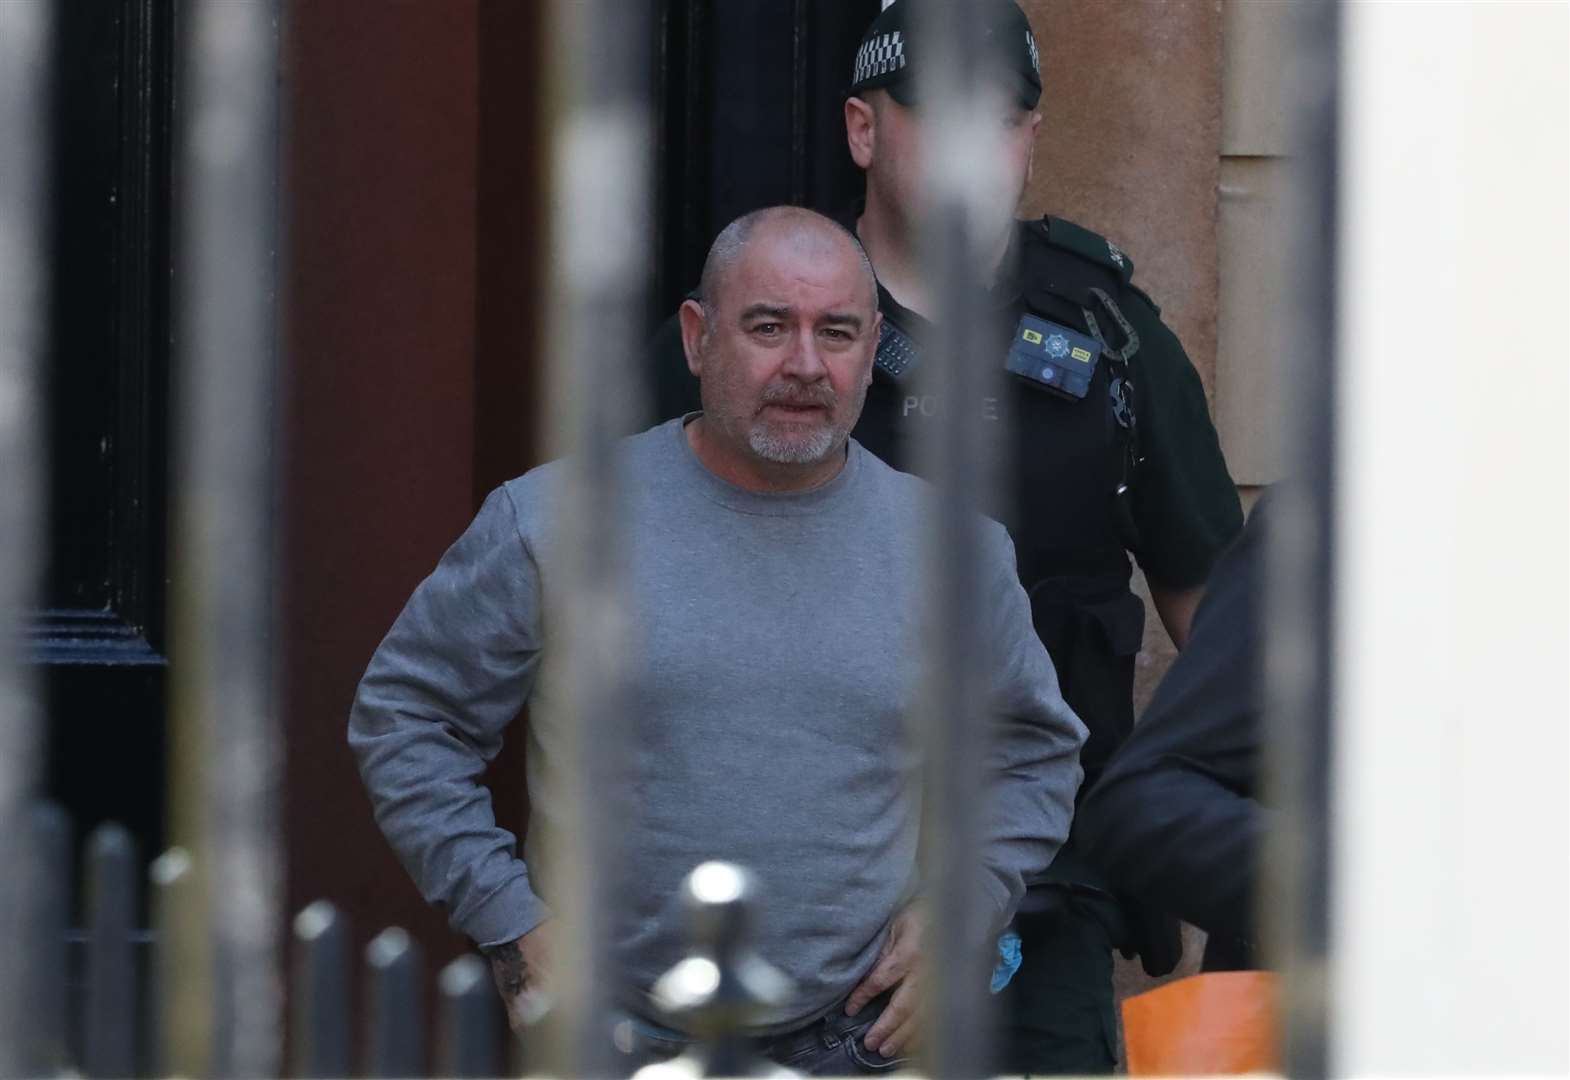 Paul McIntyre, 53, has already been charged with murder (Niall Carson/PA)